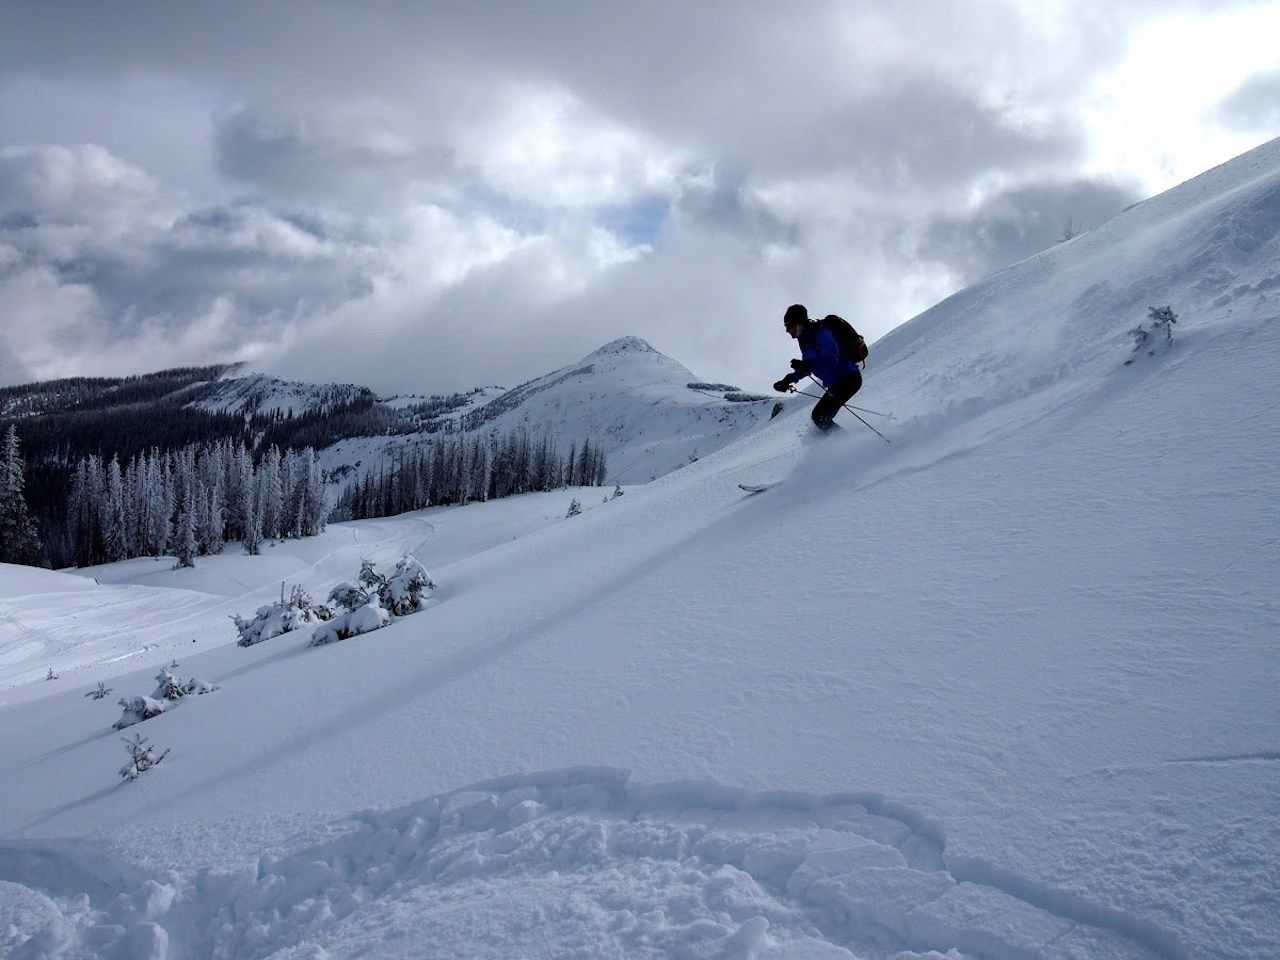 Skiier on the slopes at Wolf Creek, Colorado